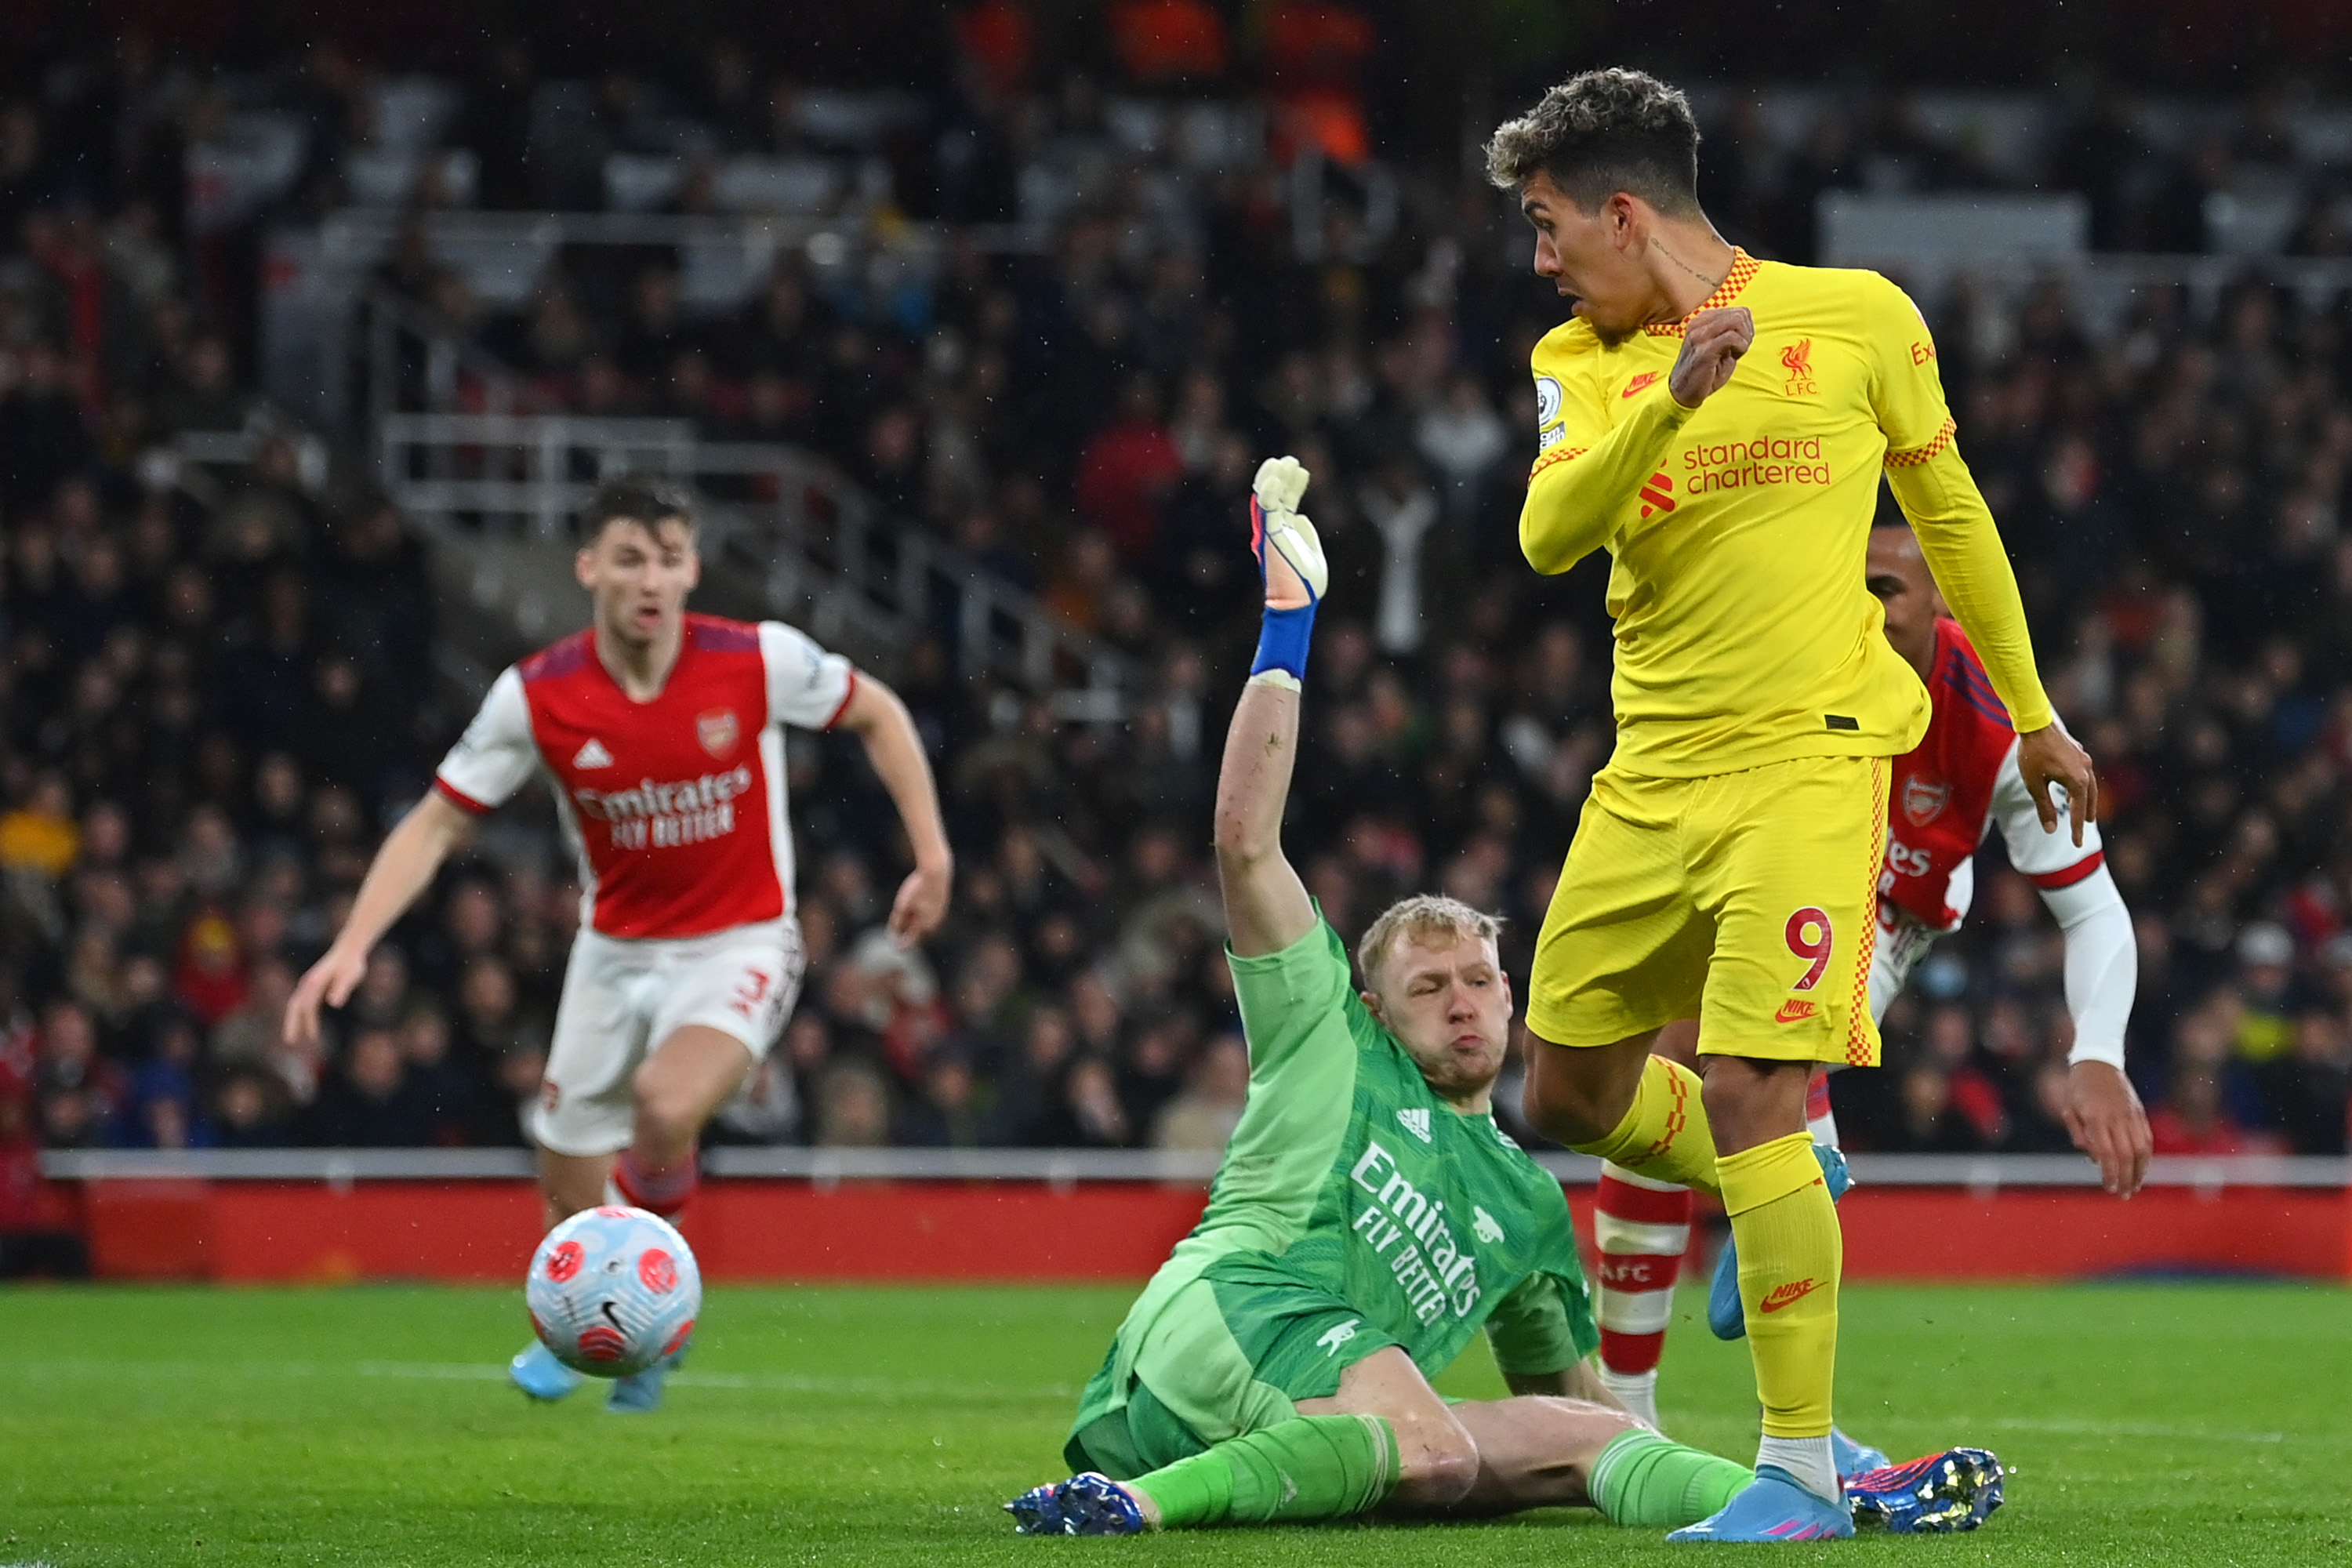 Arsenal 0-2 Liverpool LIVE: Liverpool beat Arsenal 2-0 to move within one point of leaders Manchester City; Goals from Jota and Firmino sealed the victory